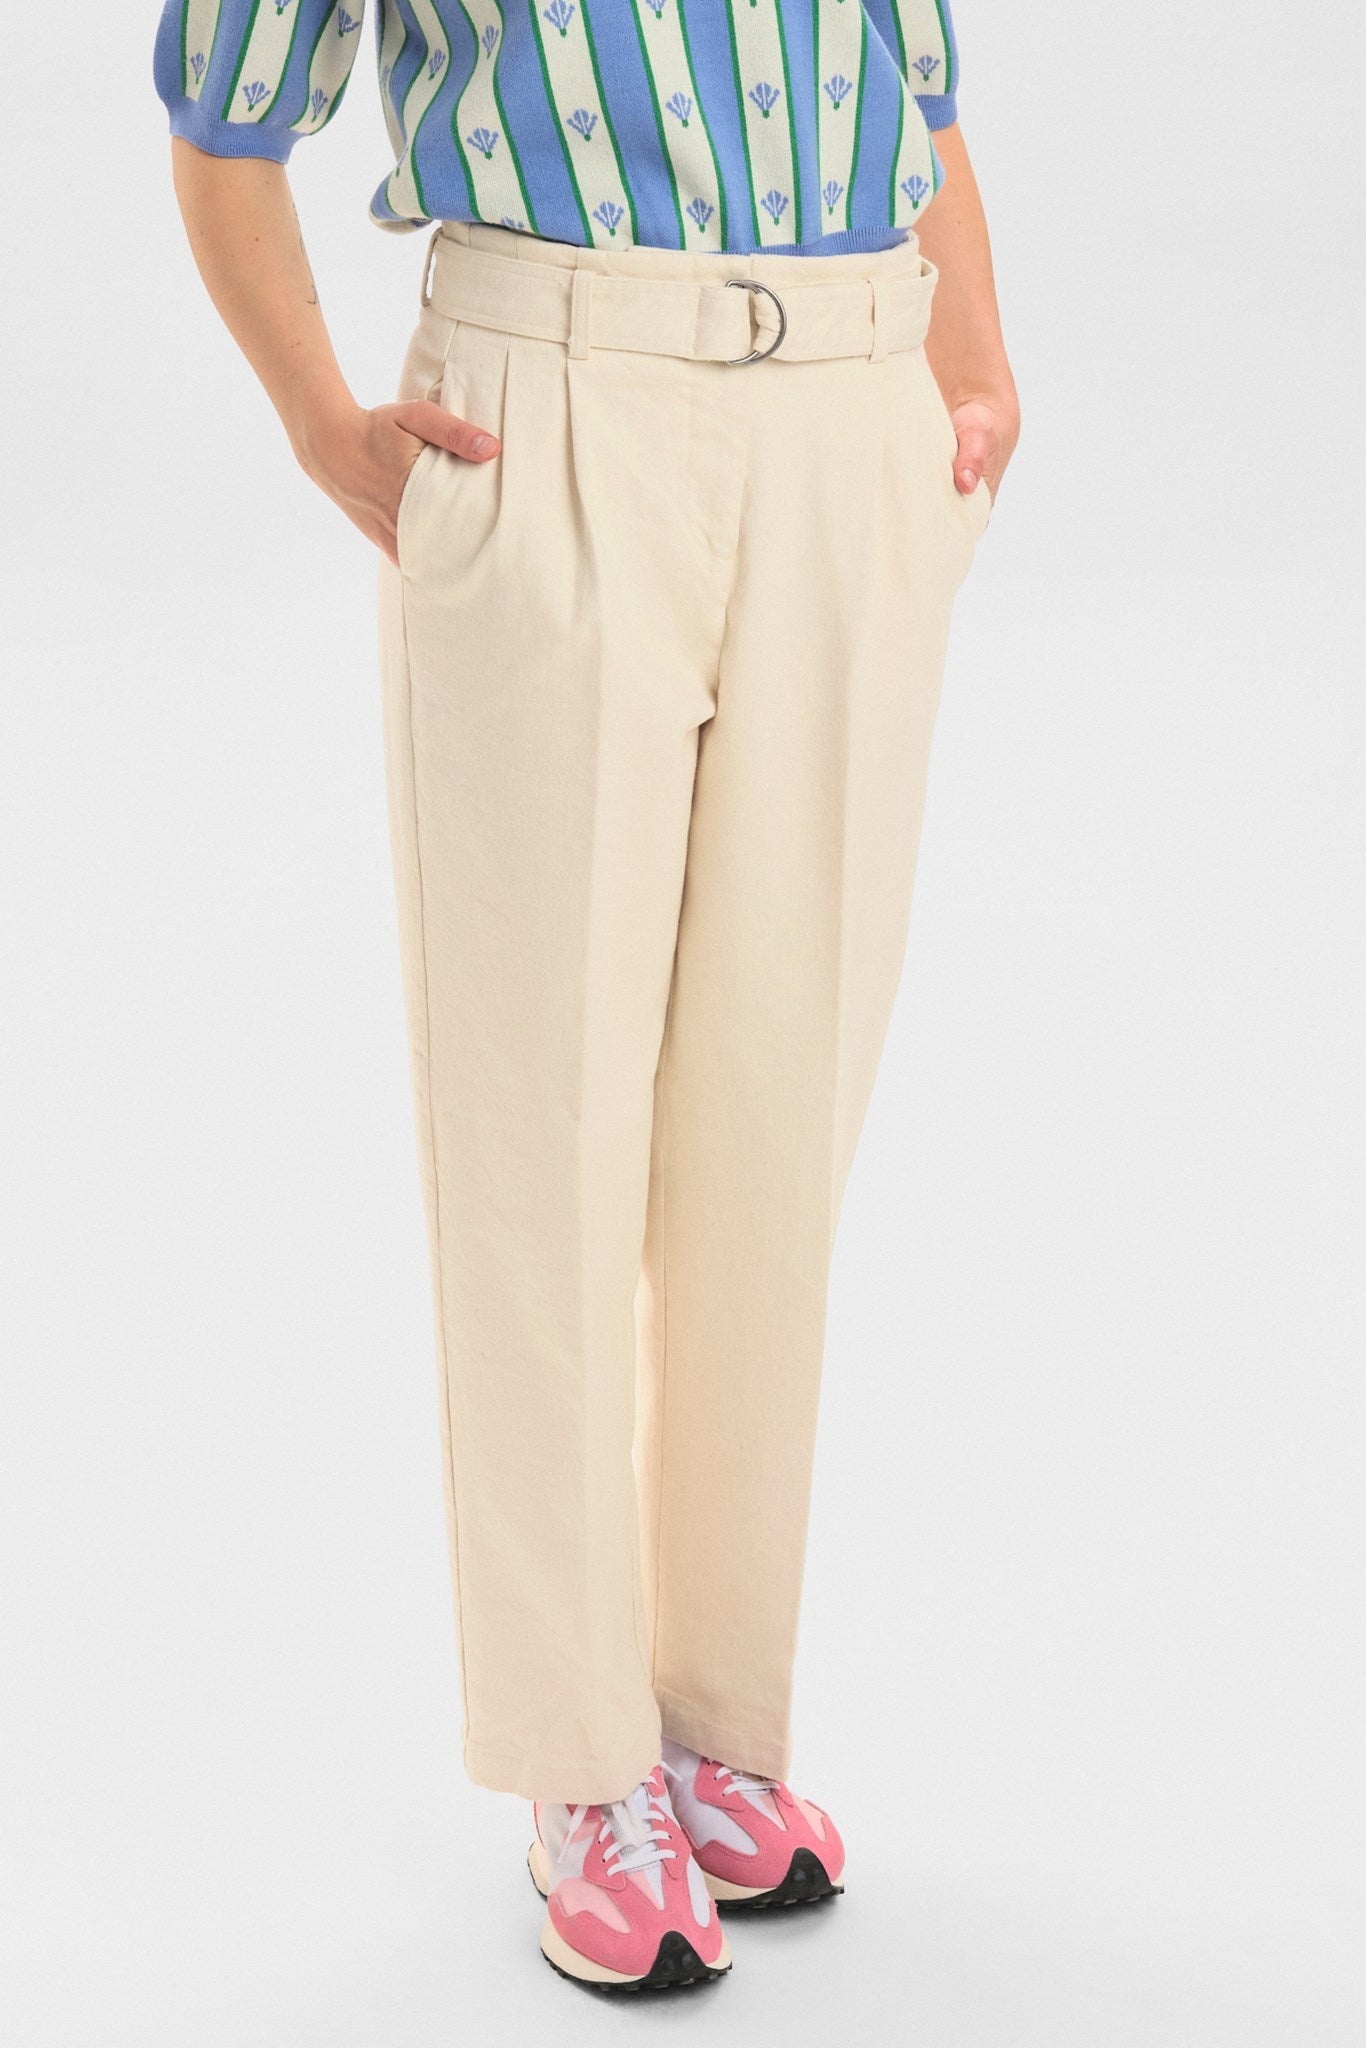 PRE-OWNED NUCAIRO PANT - Pristine